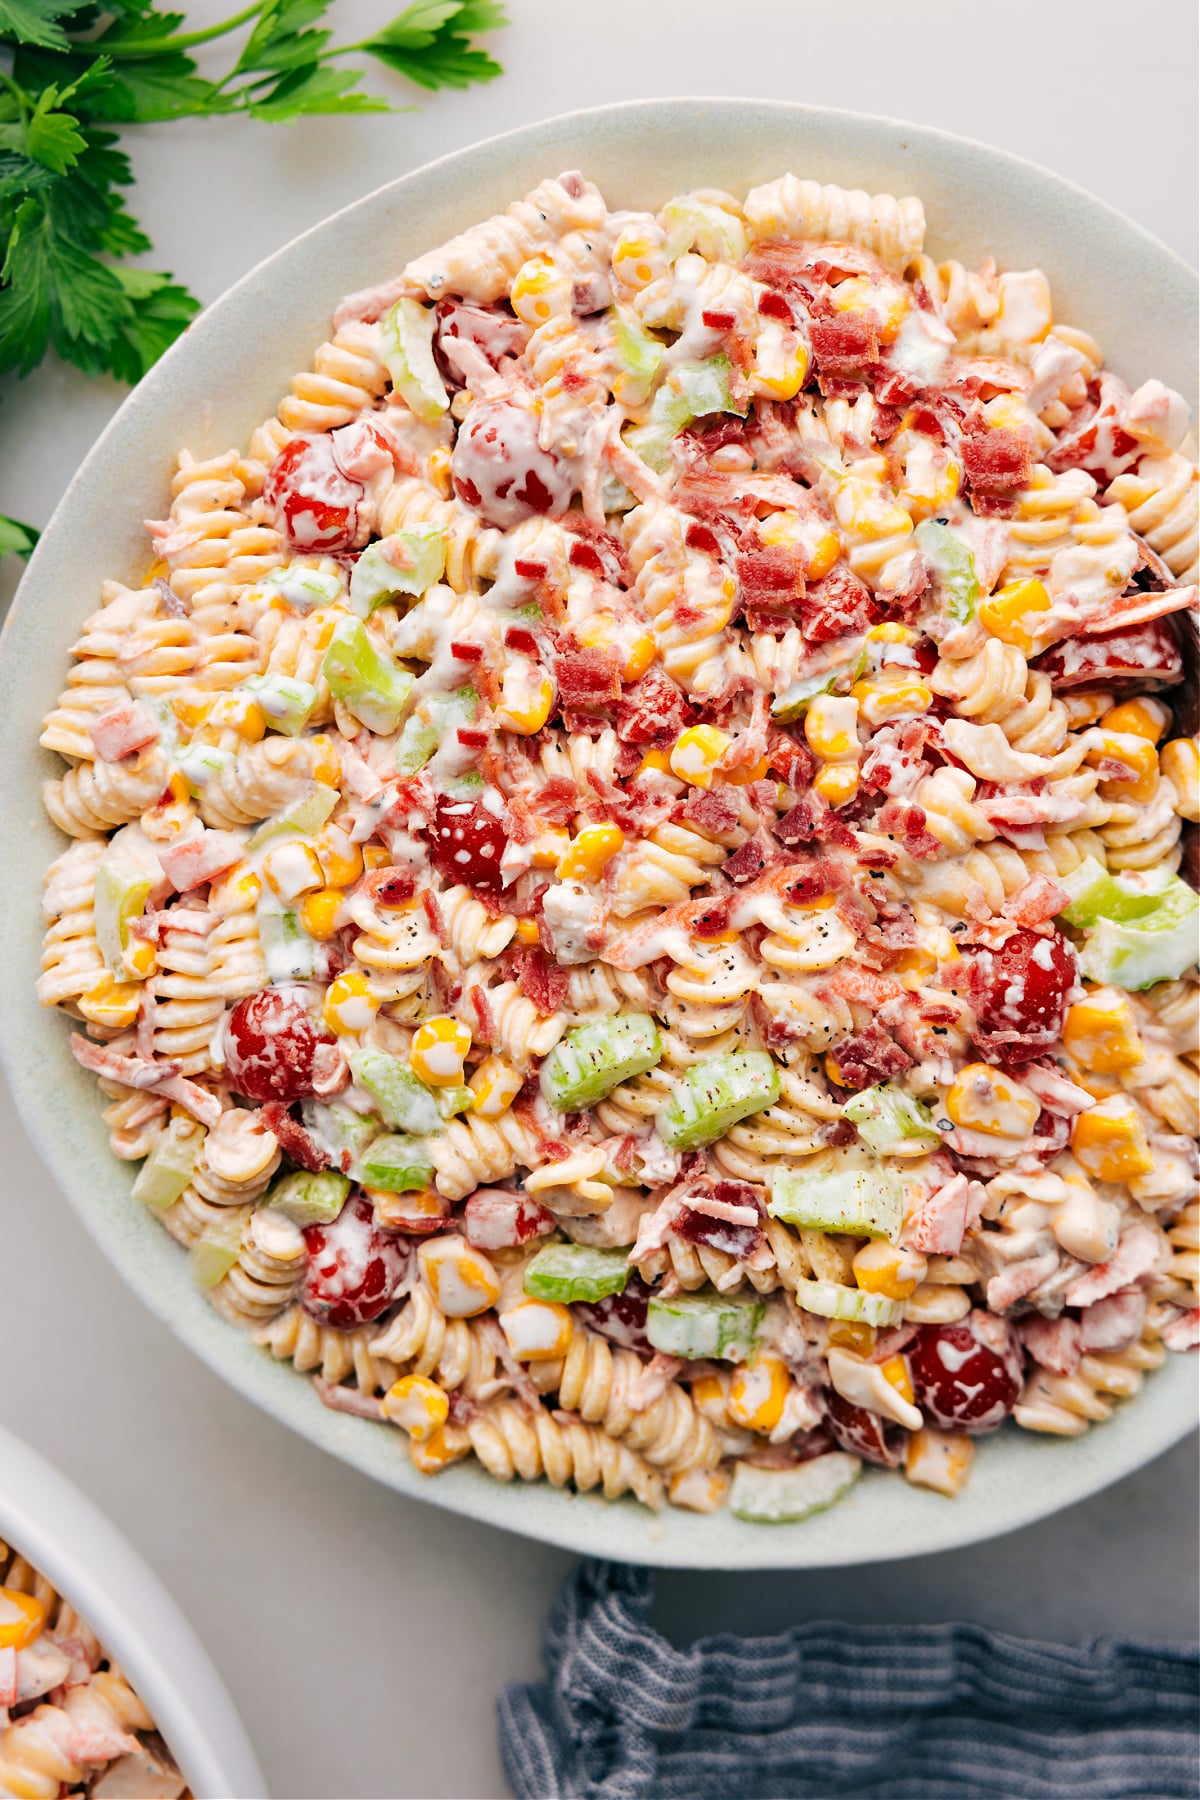 Chicken Pasta Salad recipe in a bowl ready to be served.